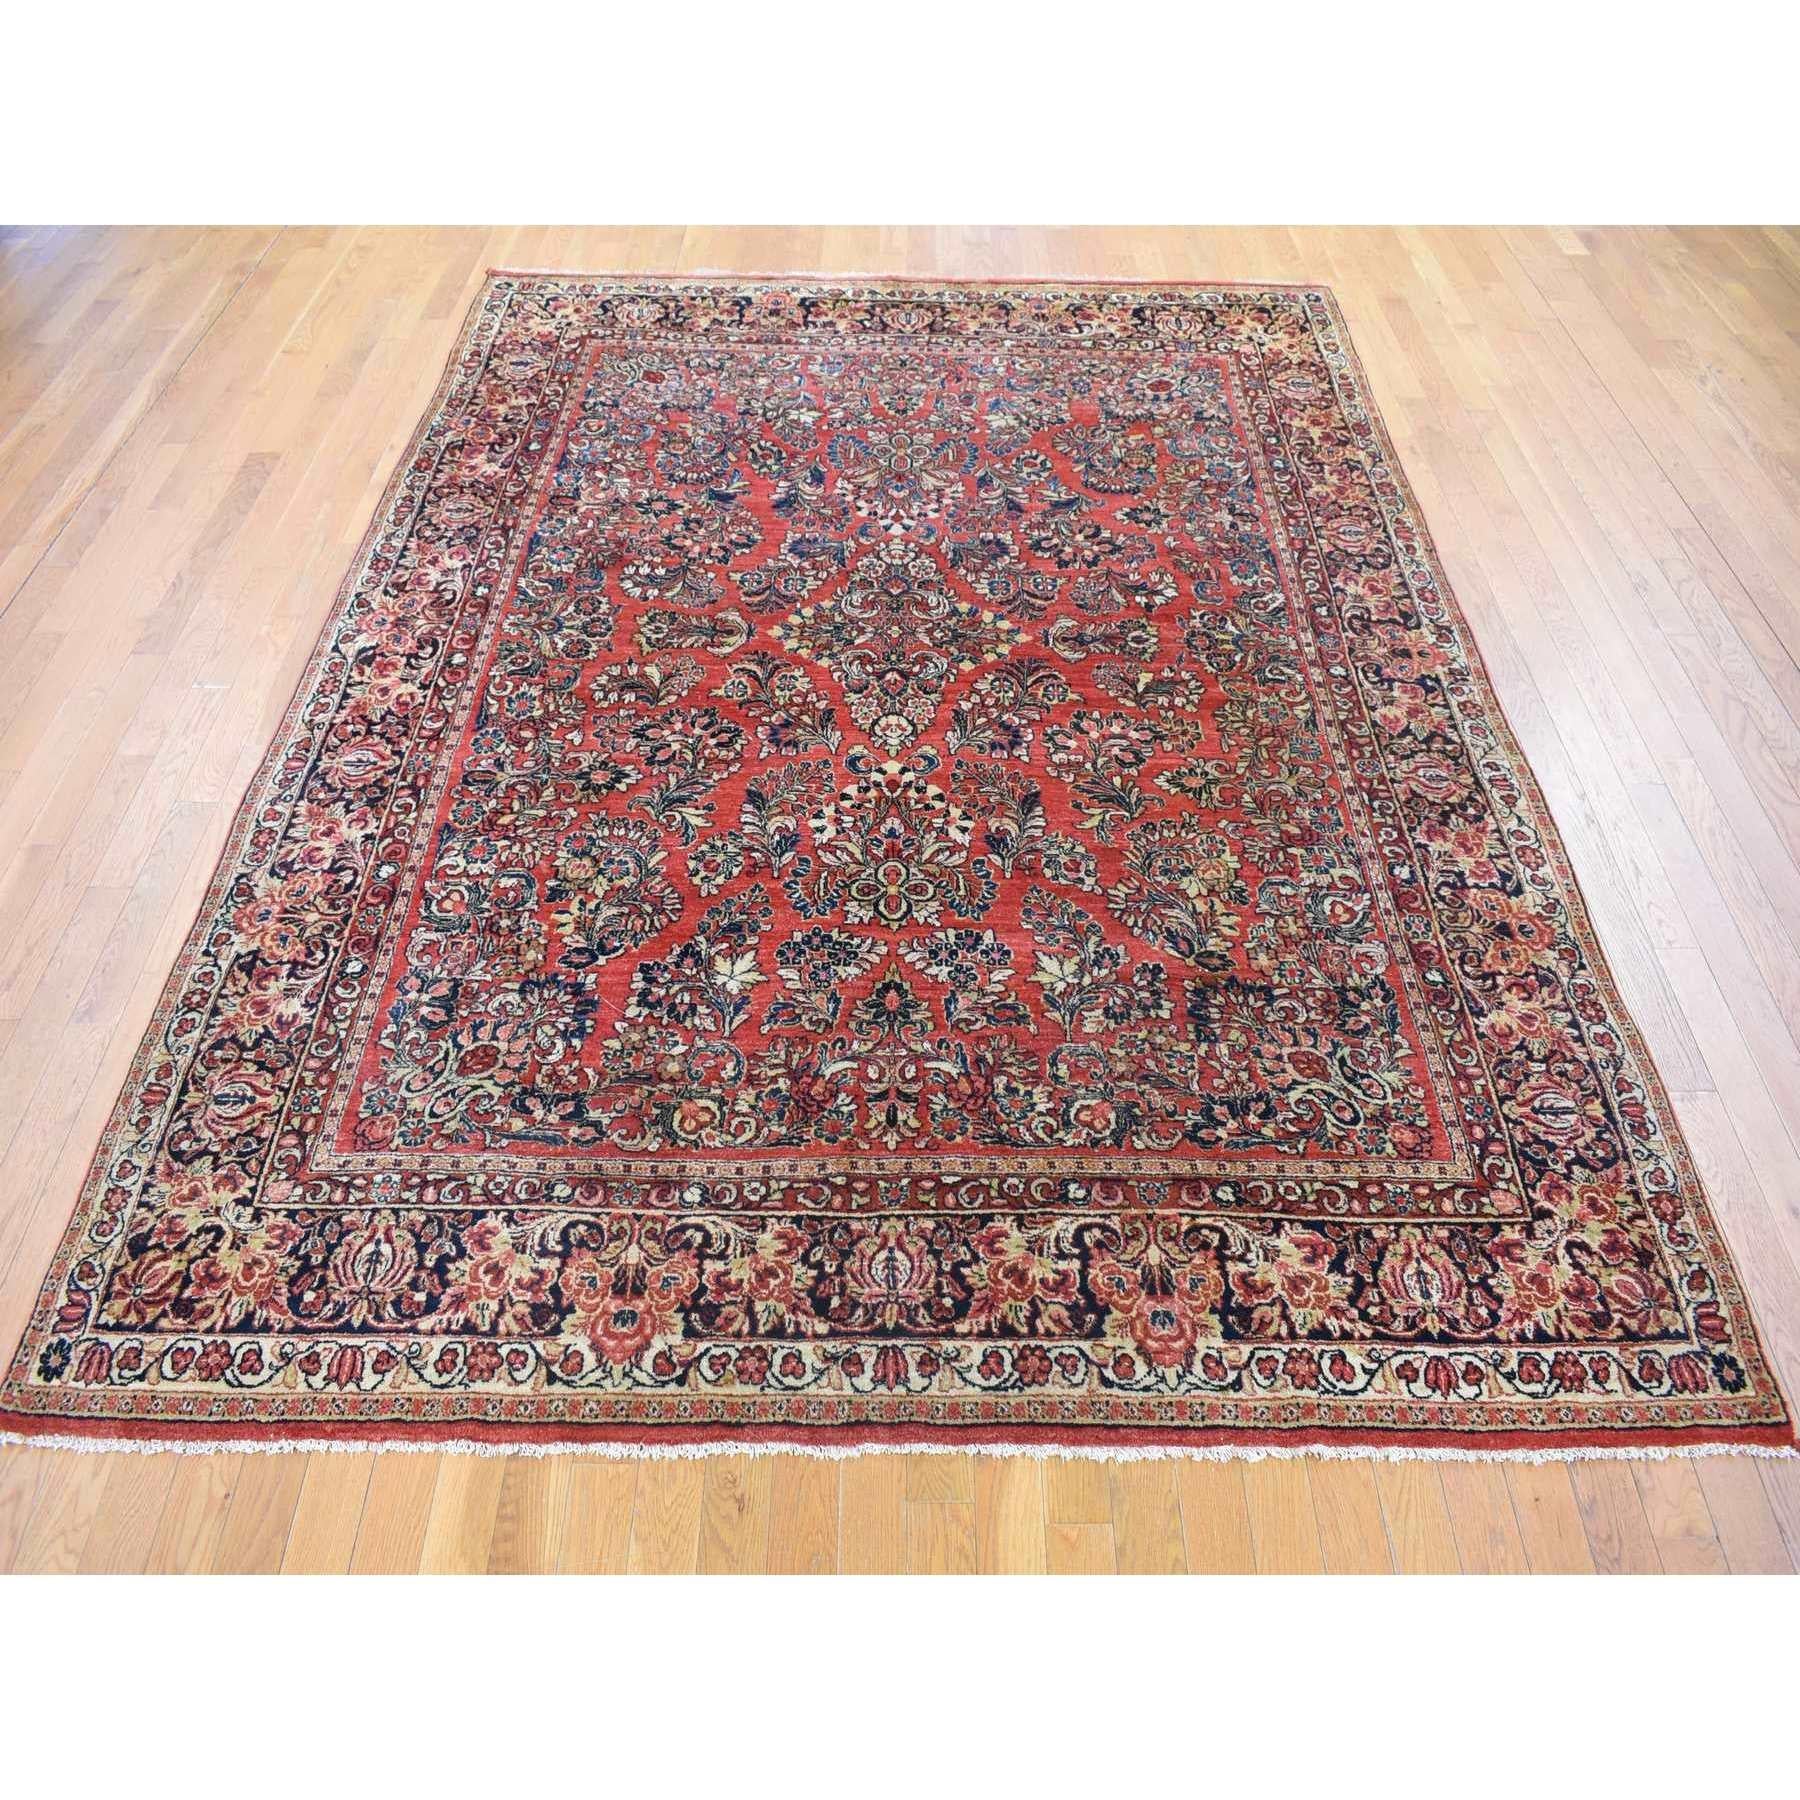 This fabulous hand-knotted carpet has been created and designed for extra strength and durability. This rug has been handcrafted for weeks in the traditional method that is used to make
Exact Rug Size in Feet and Inches : 7'10